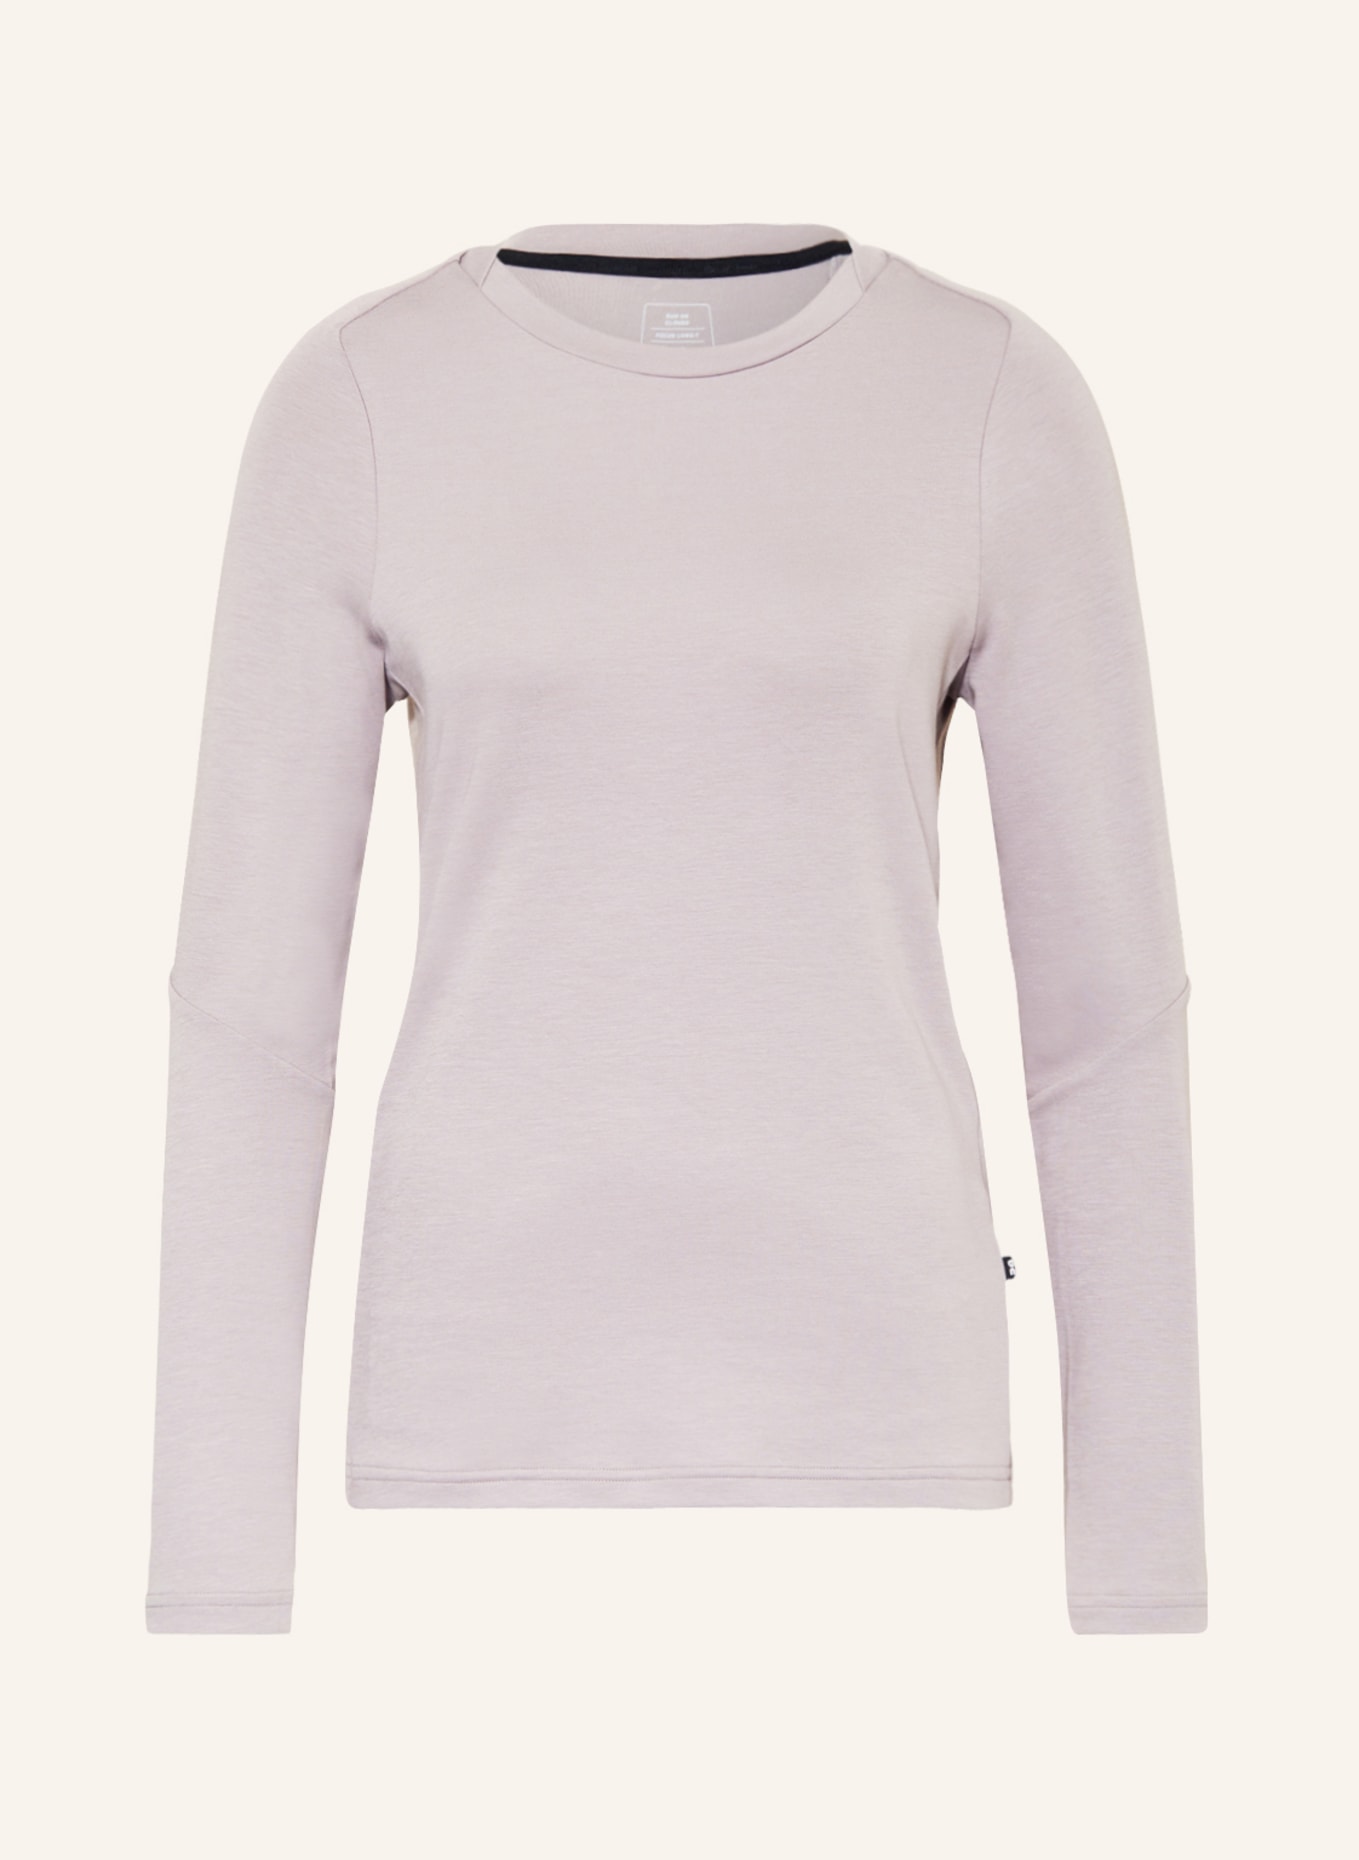 On Long sleeve shirt FOCUS, Color: GRAY (Image 1)